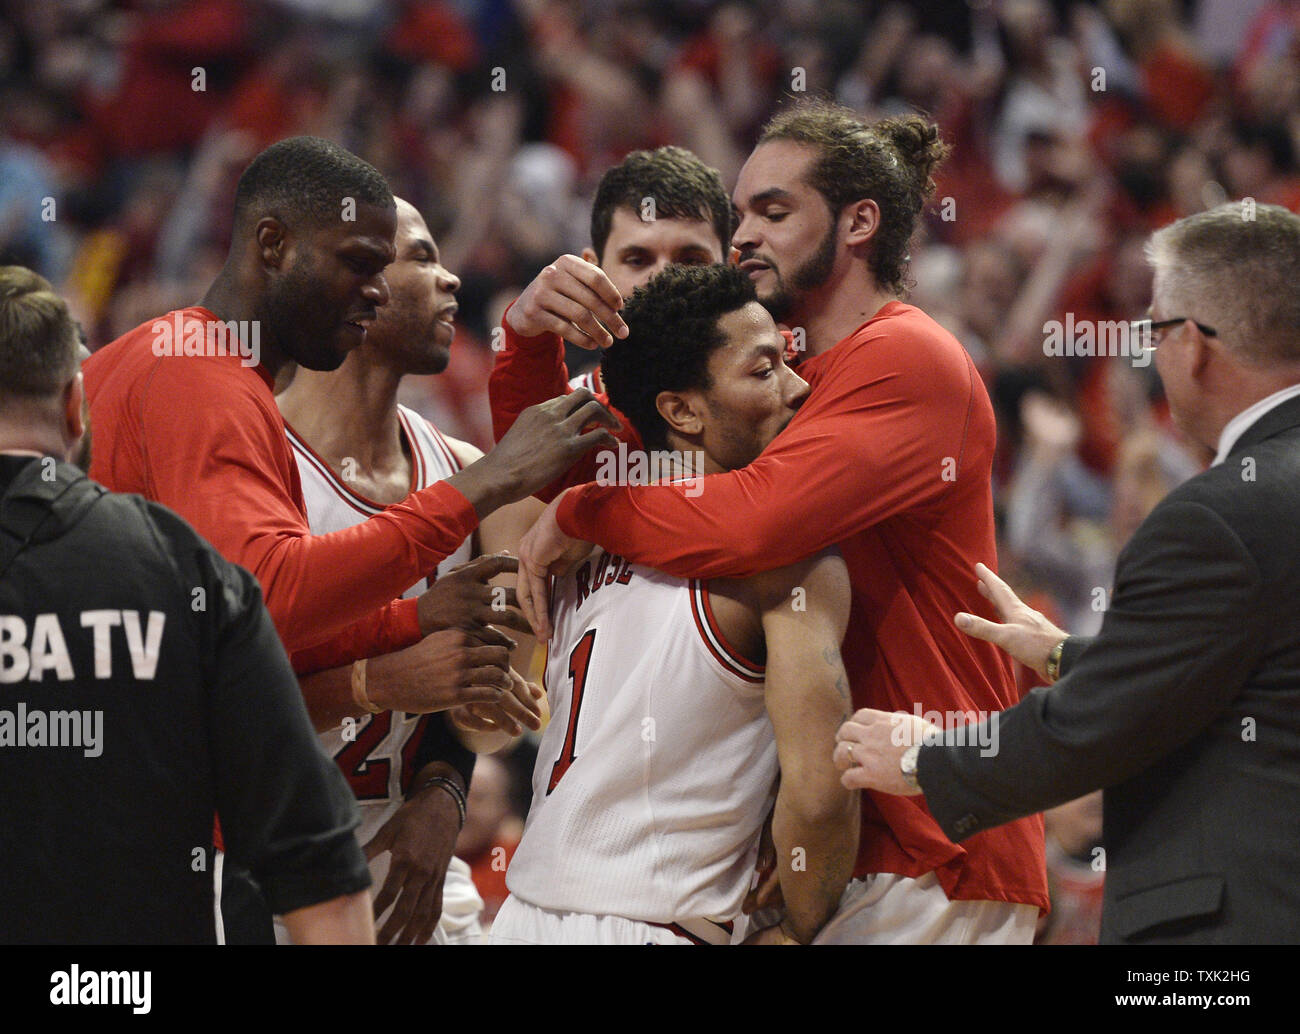 Chicago Bulls guard Derrick Rose (C) is hugged by center Joakim Noah (R), center Nazr Mohammed and the rest of his teammates after sinking a game-winning, three-point shot during the fourth quarter of game 3 the Eastern Conference Semifinals of the NBA Playoffs against the Cleveland Cavaliers at the United Center on May 8, 2015 in Chicago. The Bulls defeated the Cavaliers 99-96 and lead the best of seven series 2-1.     Photo by Brian Kersey/UPI Stock Photo